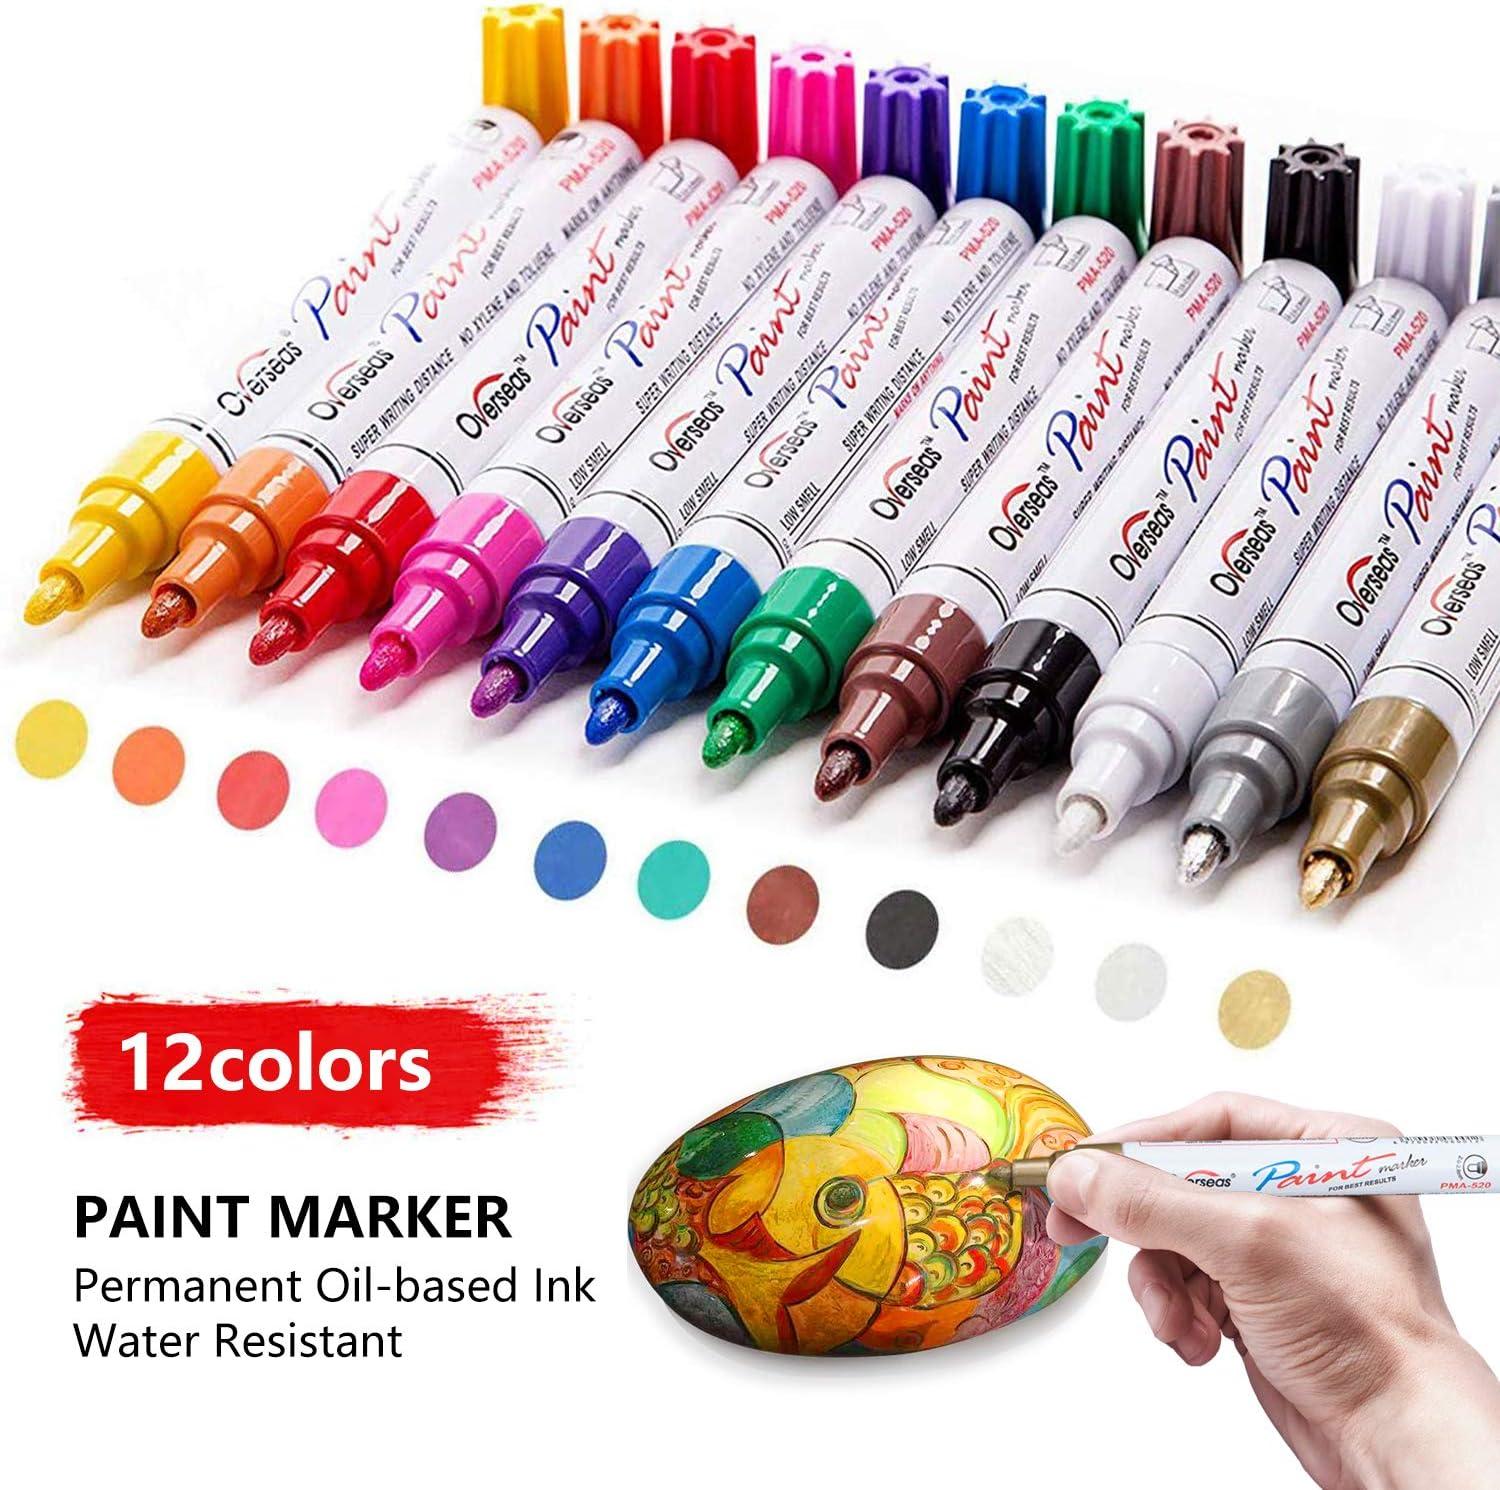  KGODGL Permanent Paint Pens 2 Pack Red Paint Markers Oil based  Paint pen Never Fade Quick Dry for metal, Rock Painting, rubber, ceramics,  wood,plastic, fabric, canvas, glass, DIY Craft : Arts